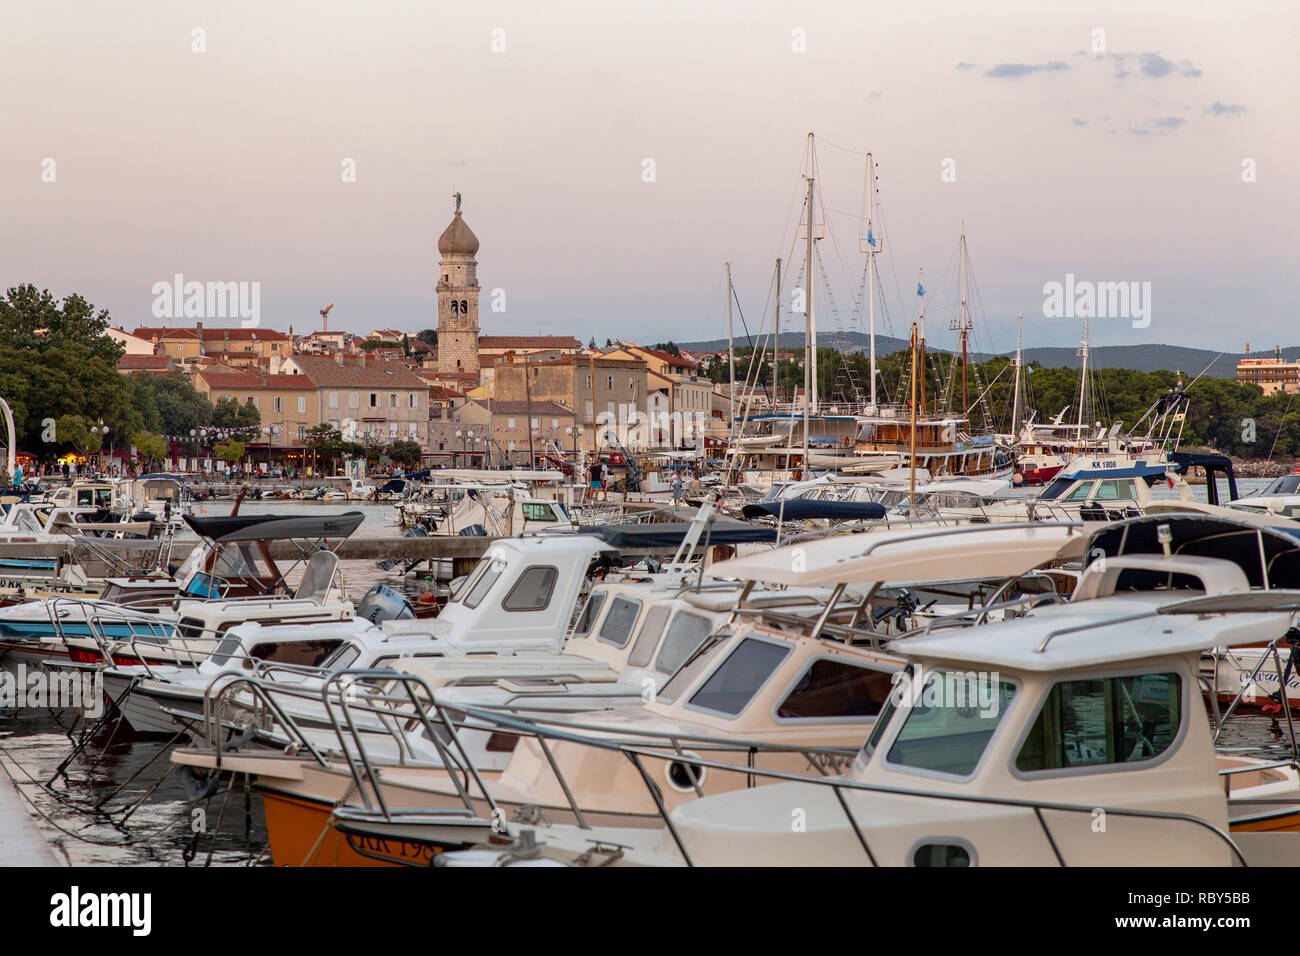 Tower of  The Cathedral of the Assumption of the Blessed Virgin Mary and boats and yachts in the harbour in front of the Old historic Town of Krk. Stock Photo